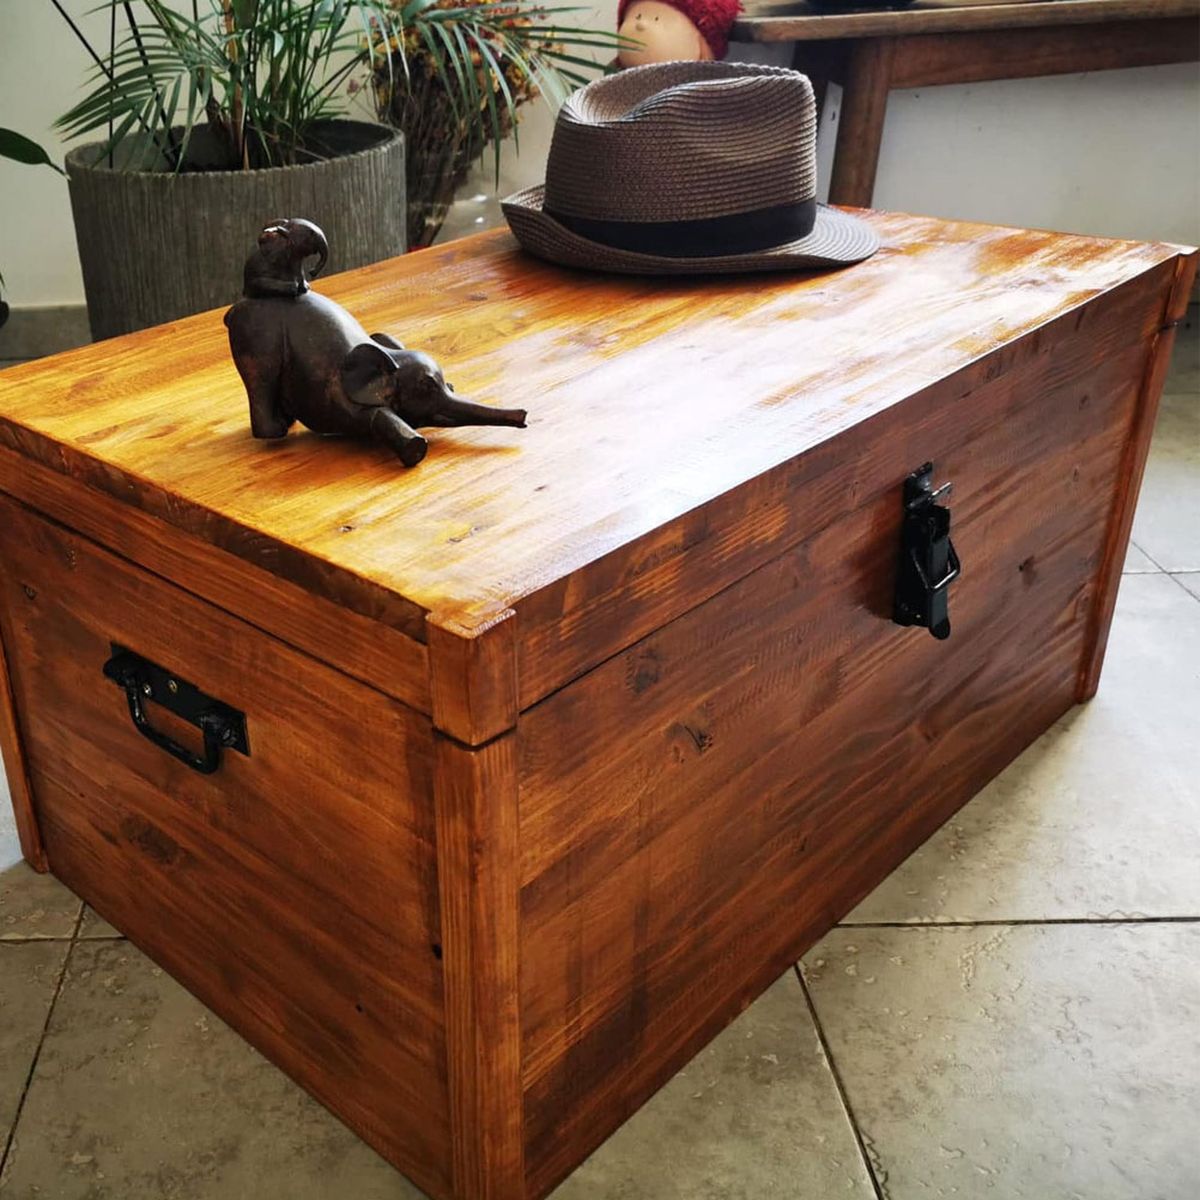 Stained pine wood chest